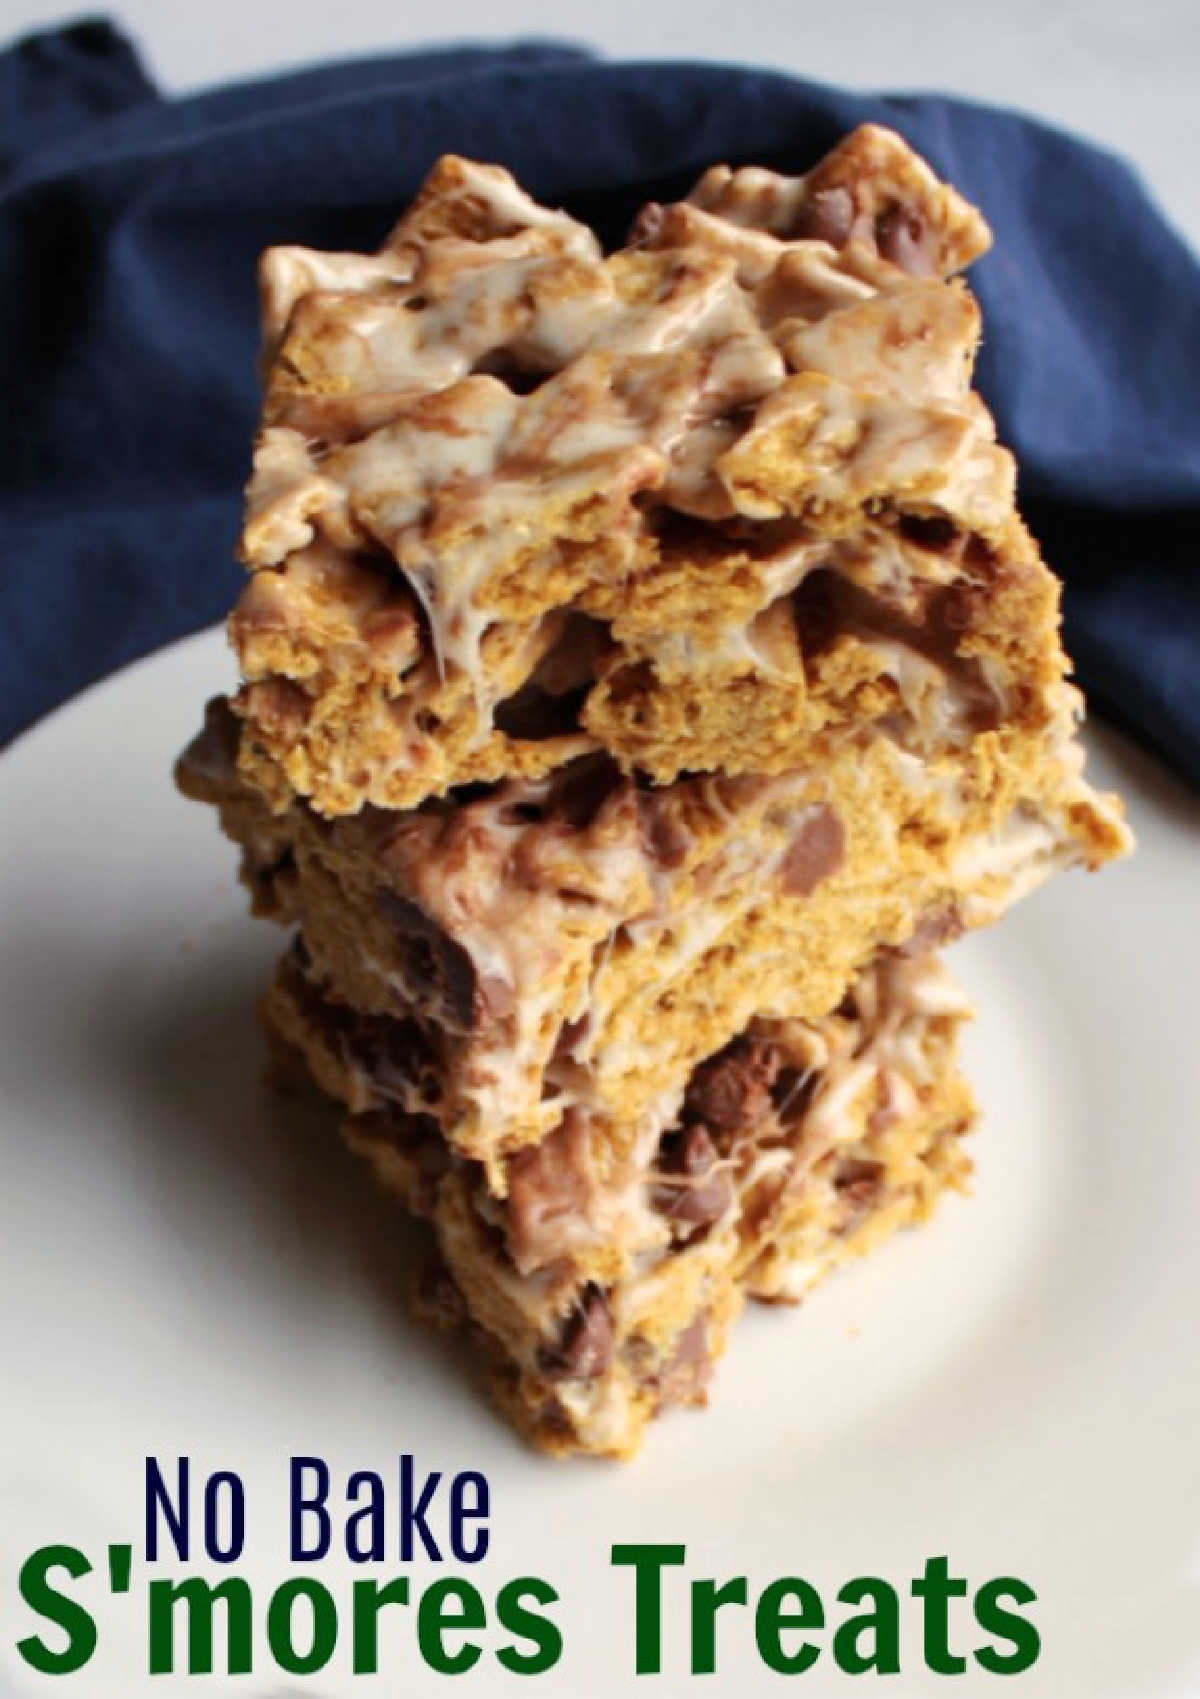 You can easily make these s'mores bars in just a few minutes and with a few simple ingredients. They travel well, everyone loves them and the kids can help make them. You can take them to parties, pack them in lunch boxes or serve them as an after school snack. It's all of the flavor of s'mores without a campfire... or an oven!